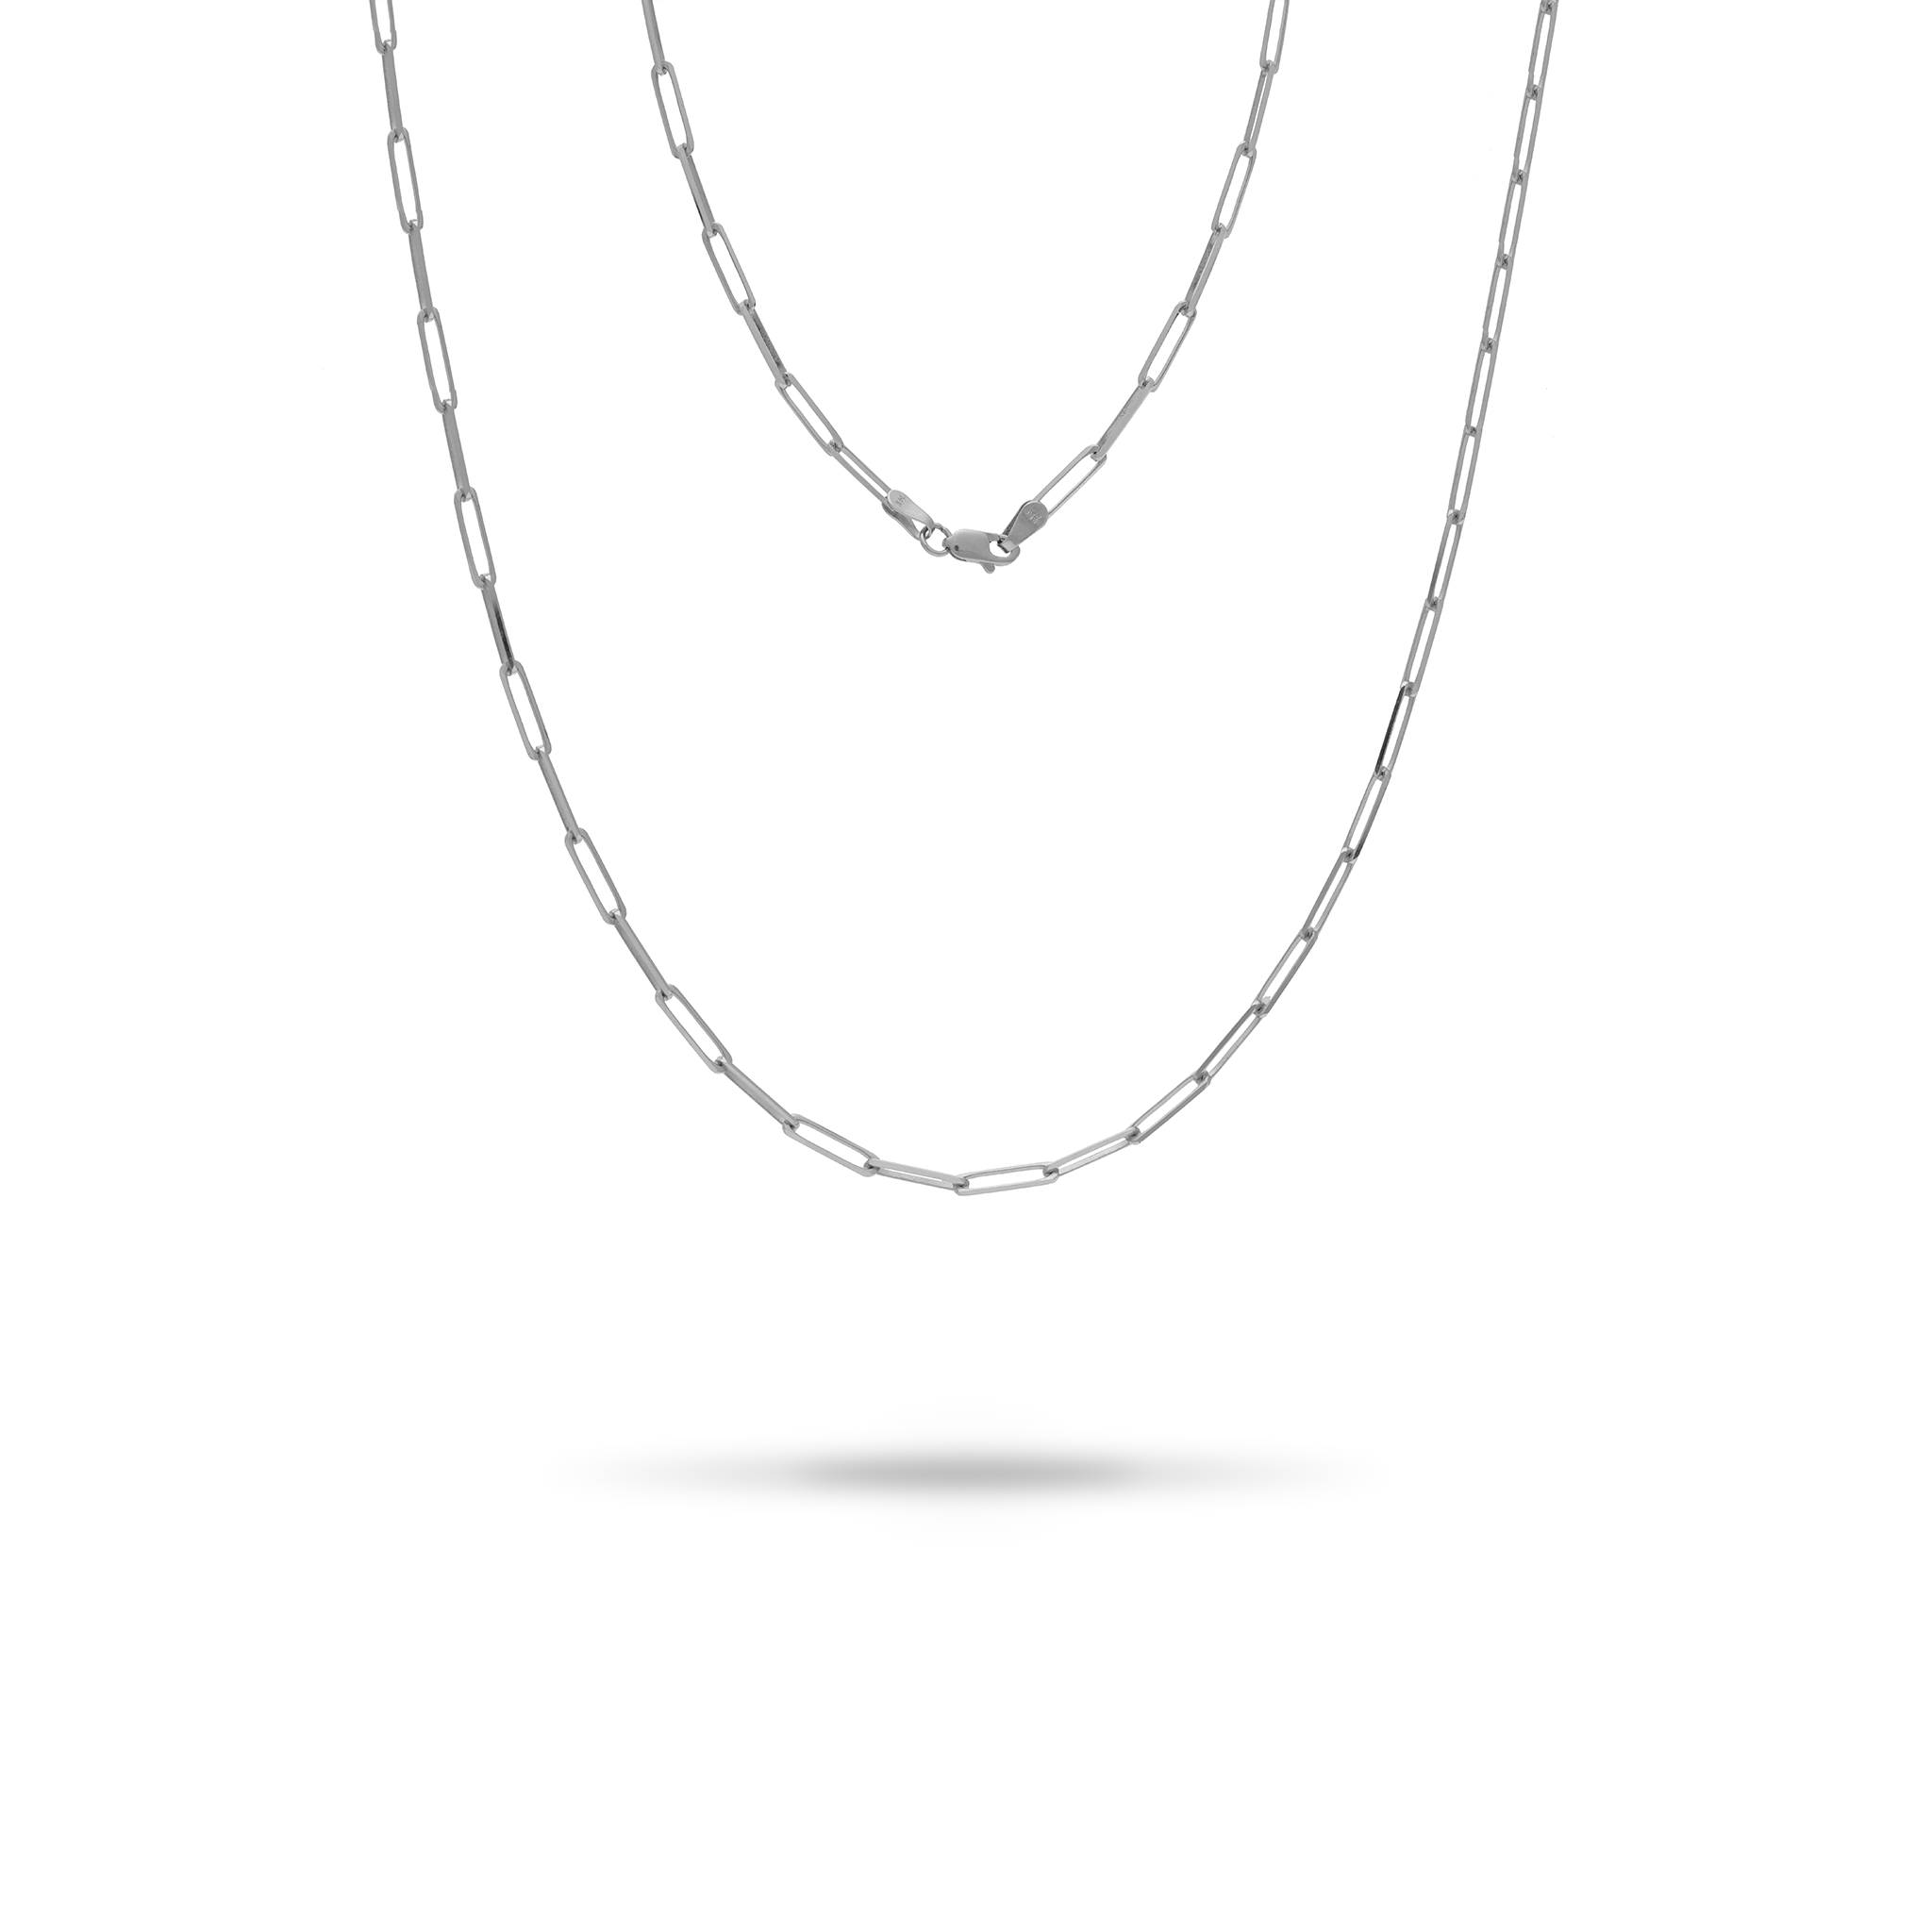 2.7mm Paperclip Chain in White Gold